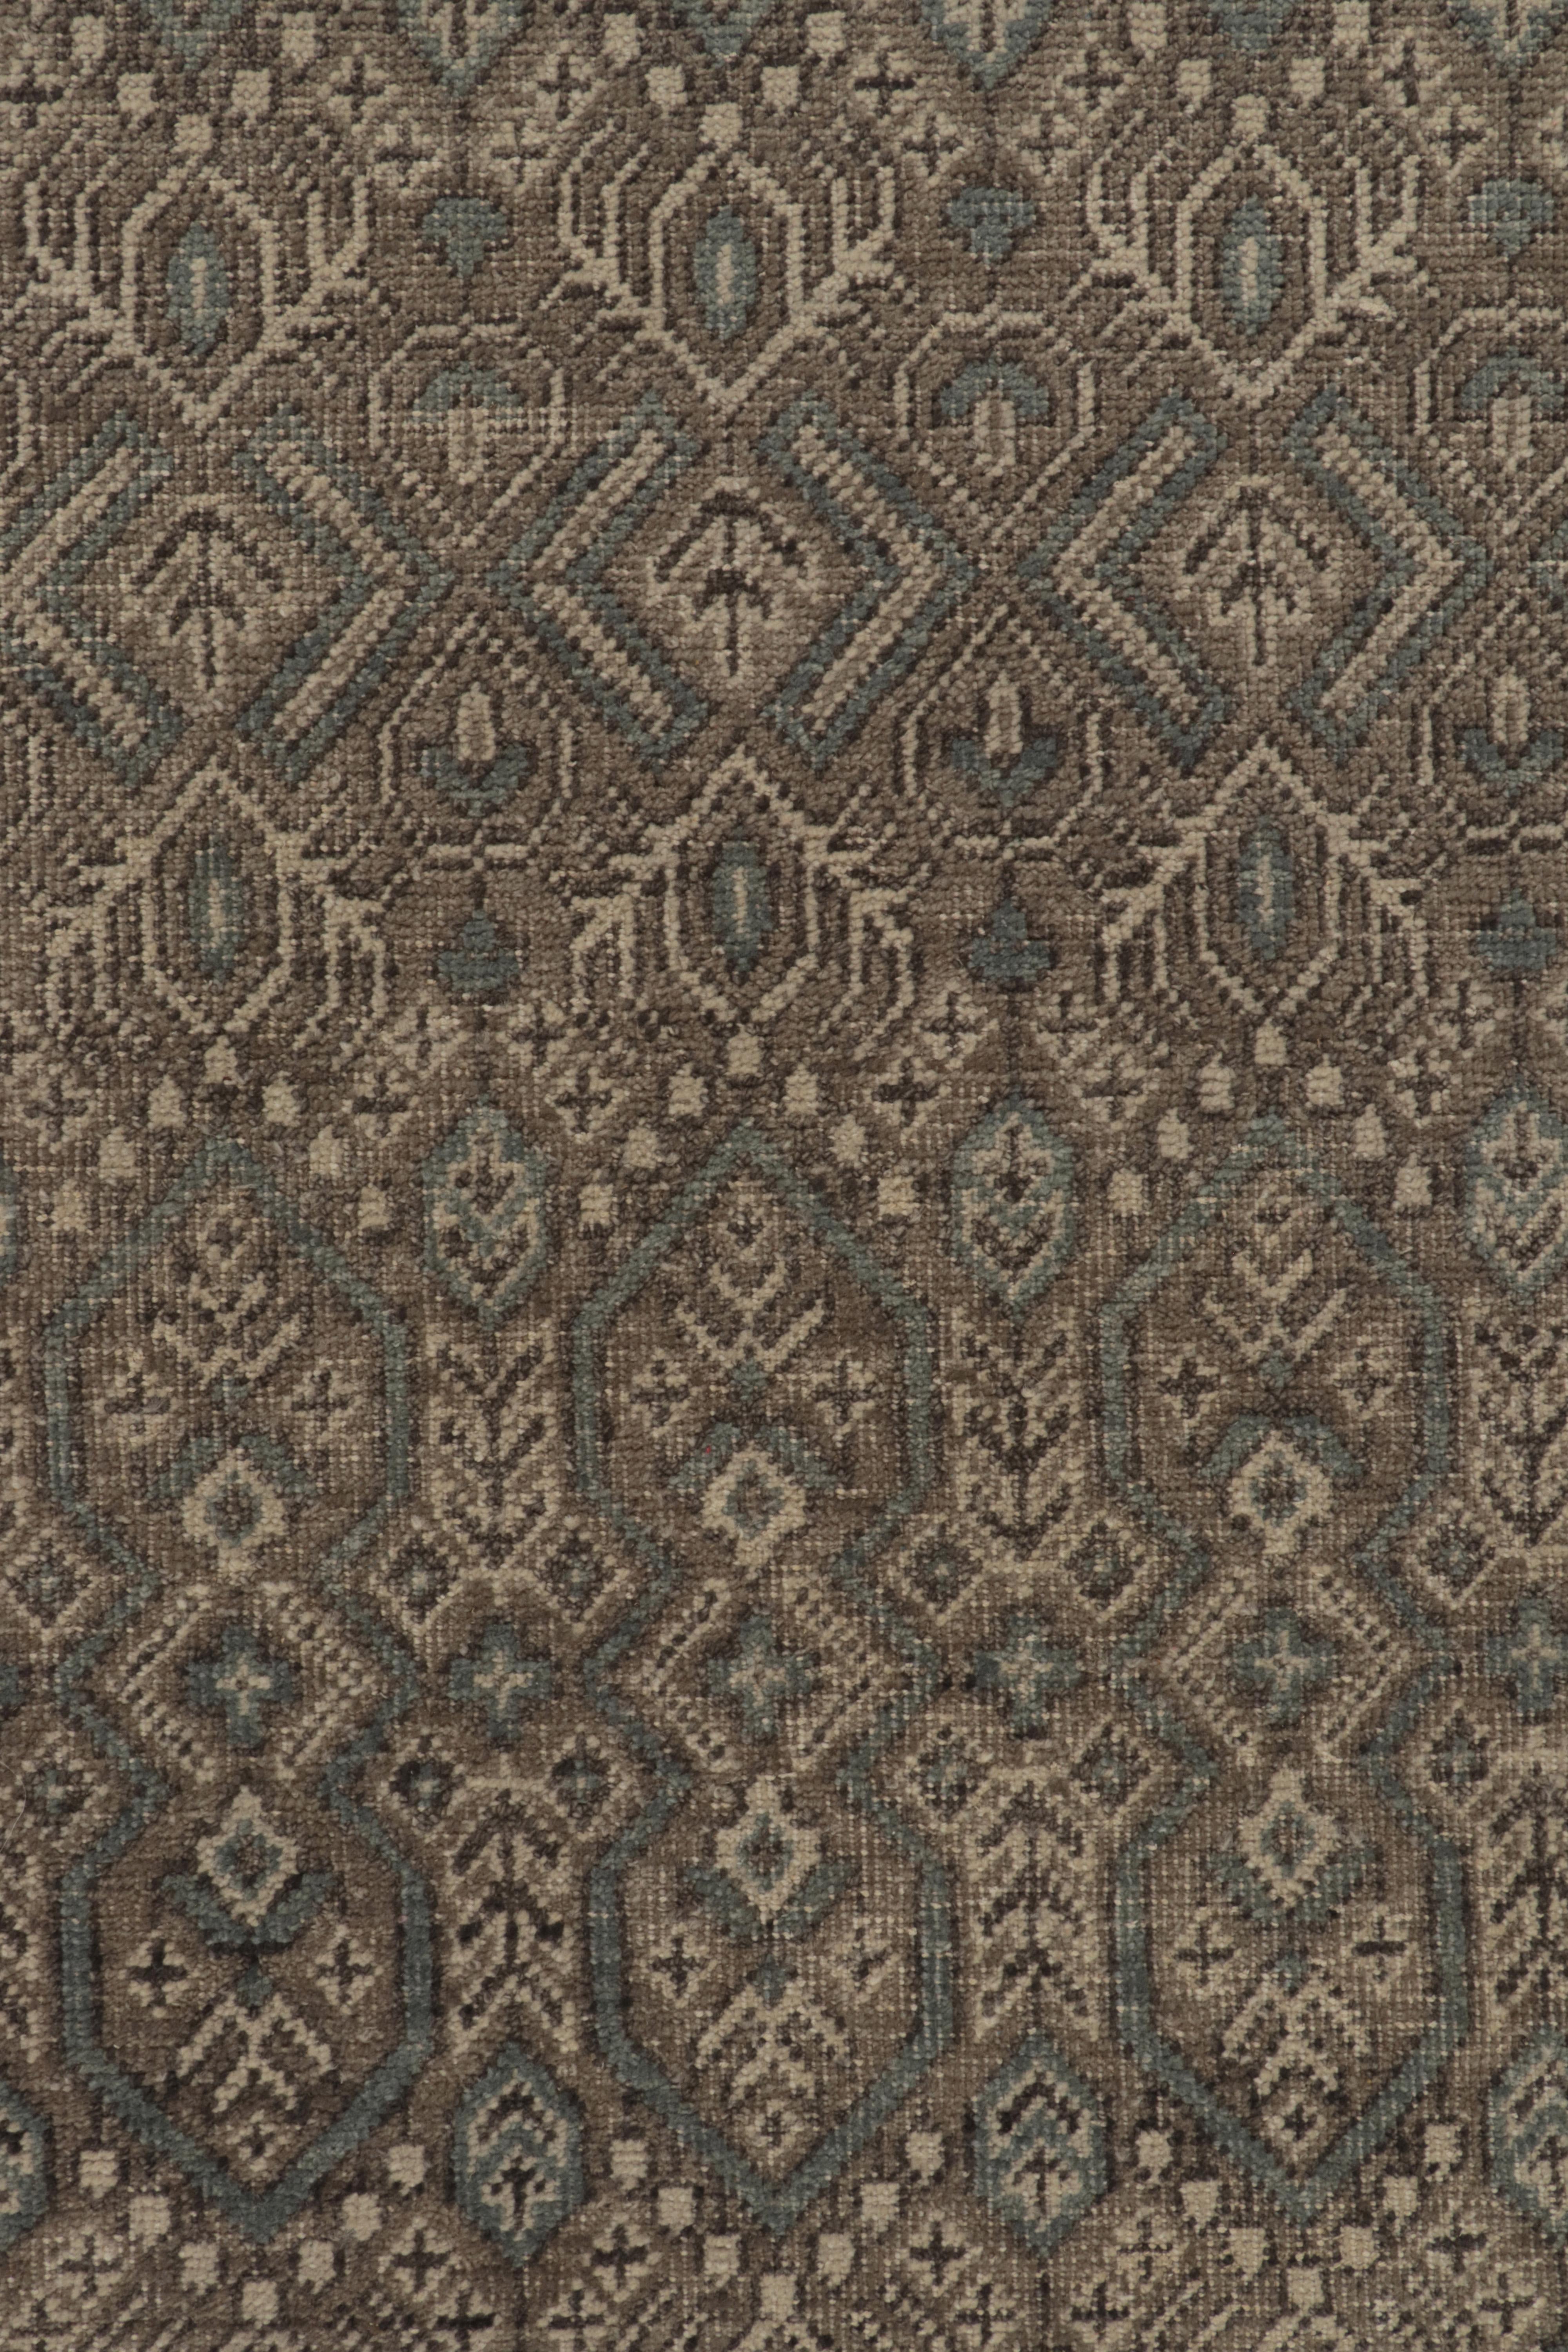 Rug & Kilim’s Distressed Style Rug in Beige-Brown, Aegean Blue Geometric Pattern In New Condition For Sale In Long Island City, NY